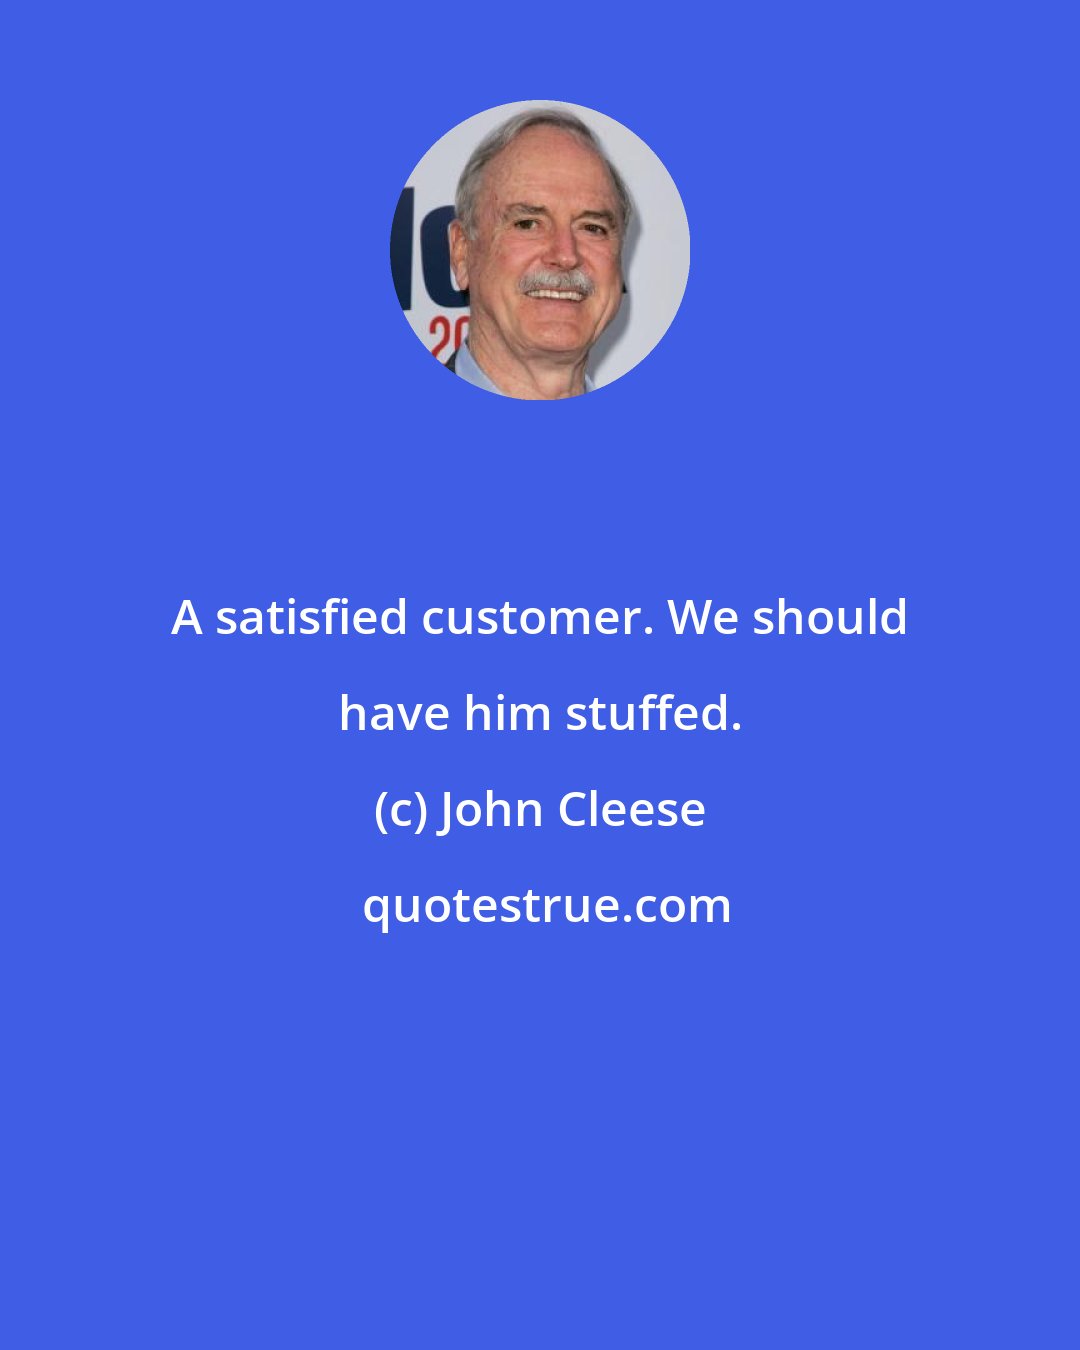 John Cleese: A satisfied customer. We should have him stuffed.